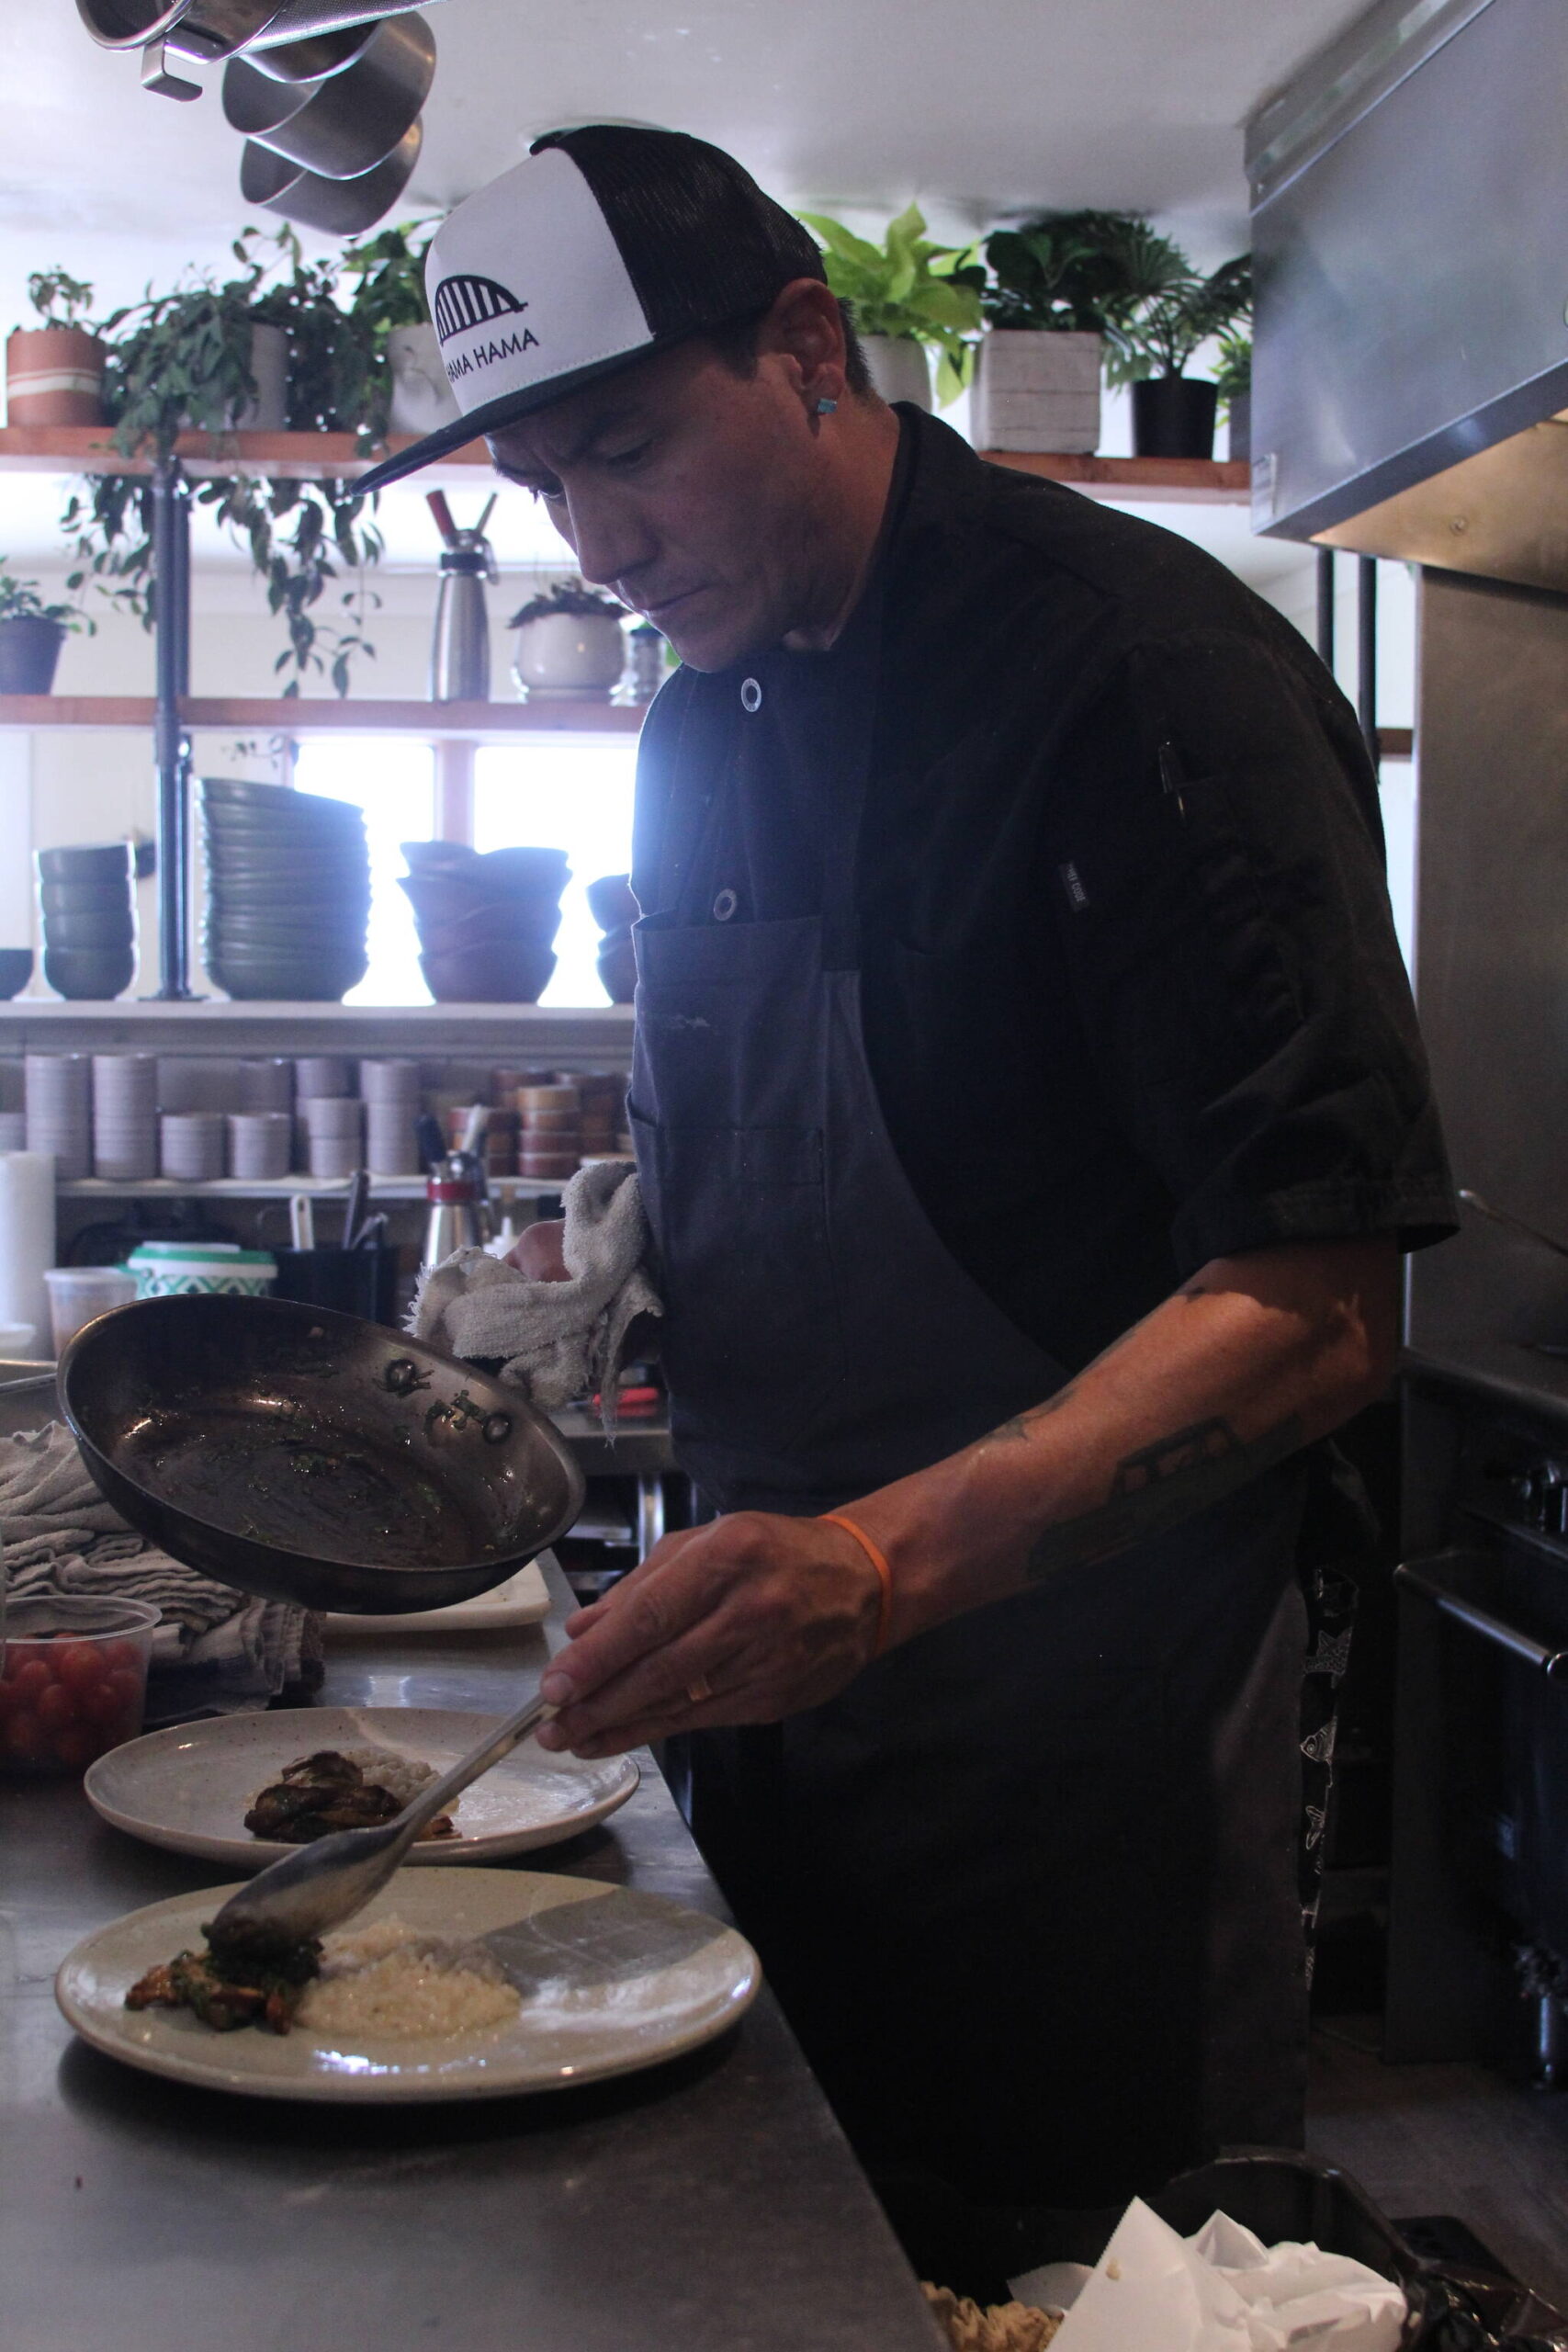 Photo by Karina Andrew/Whidbey News-Times
Ben Jones plates a meal at Oystercatcher.